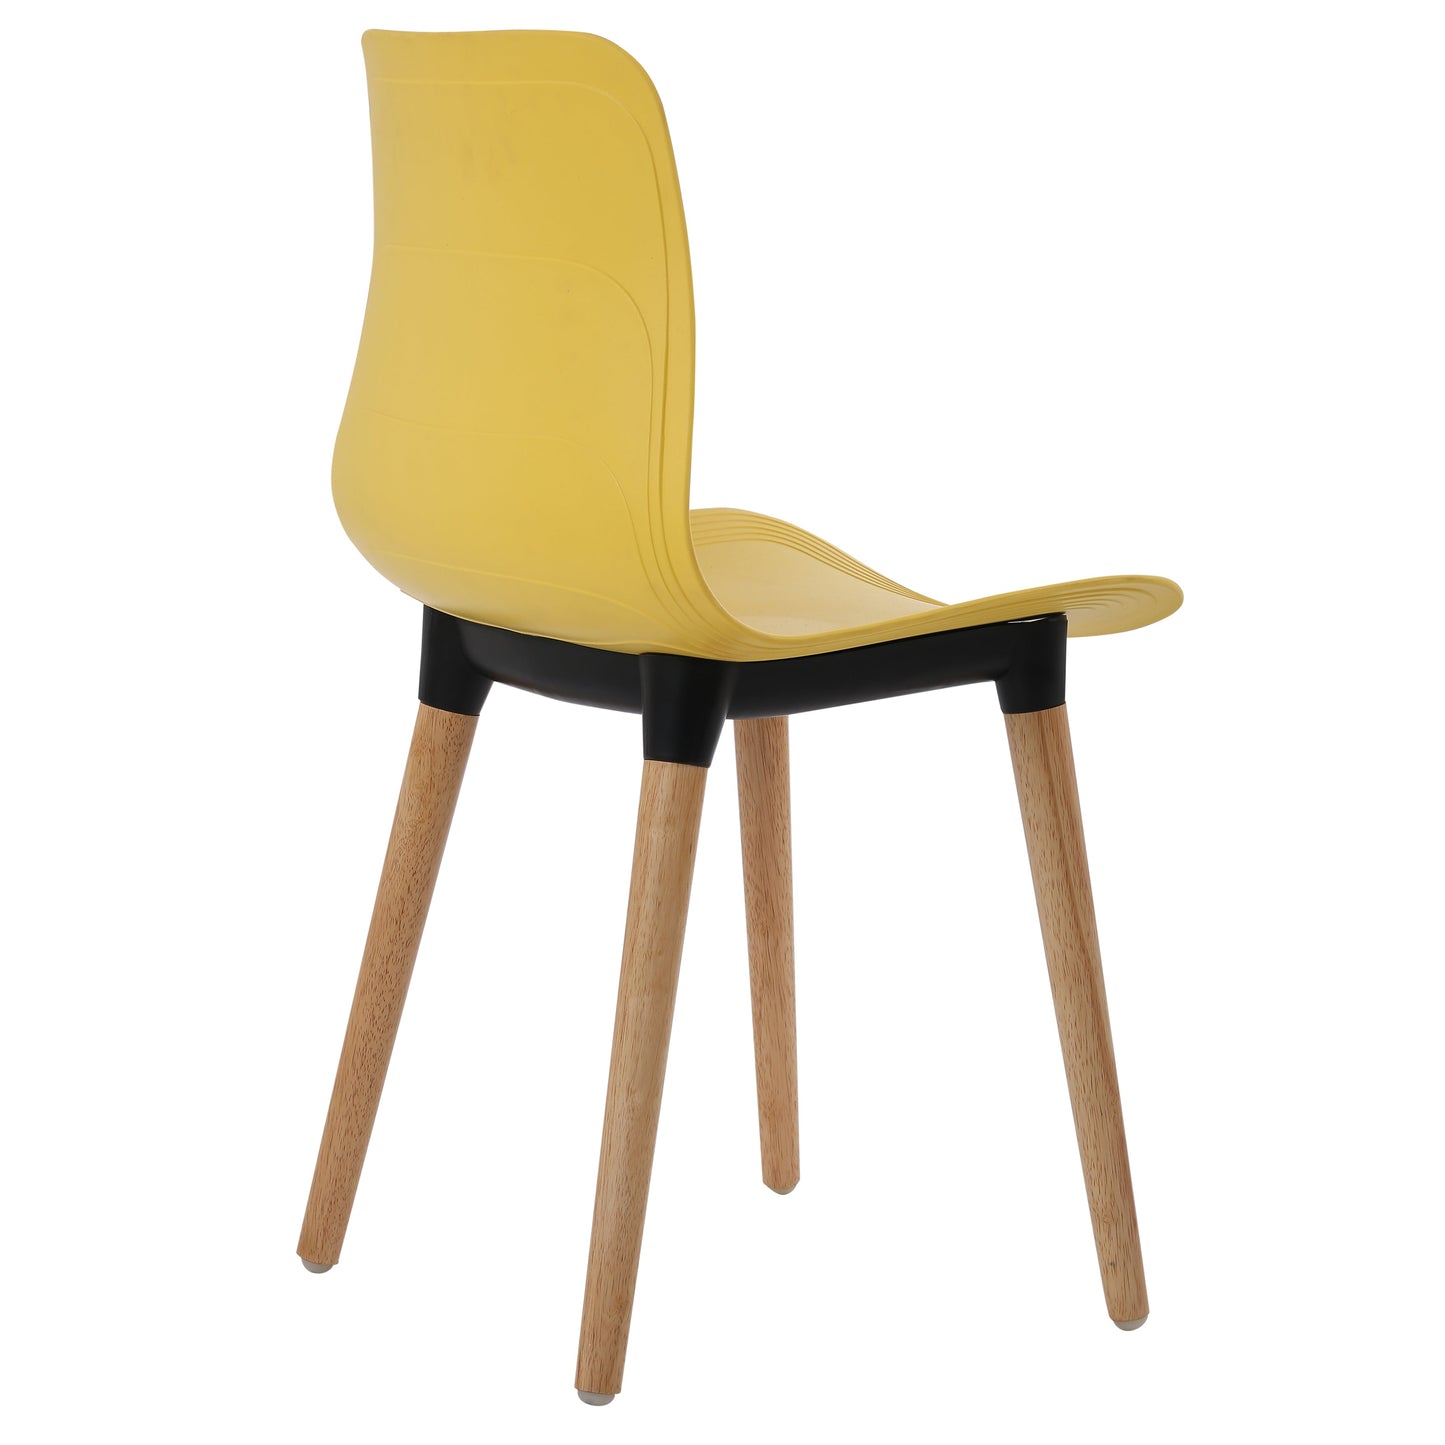 Plastic Chairs With Wood Legs For Cafe and Dining HIFUWA-G (Yellow)